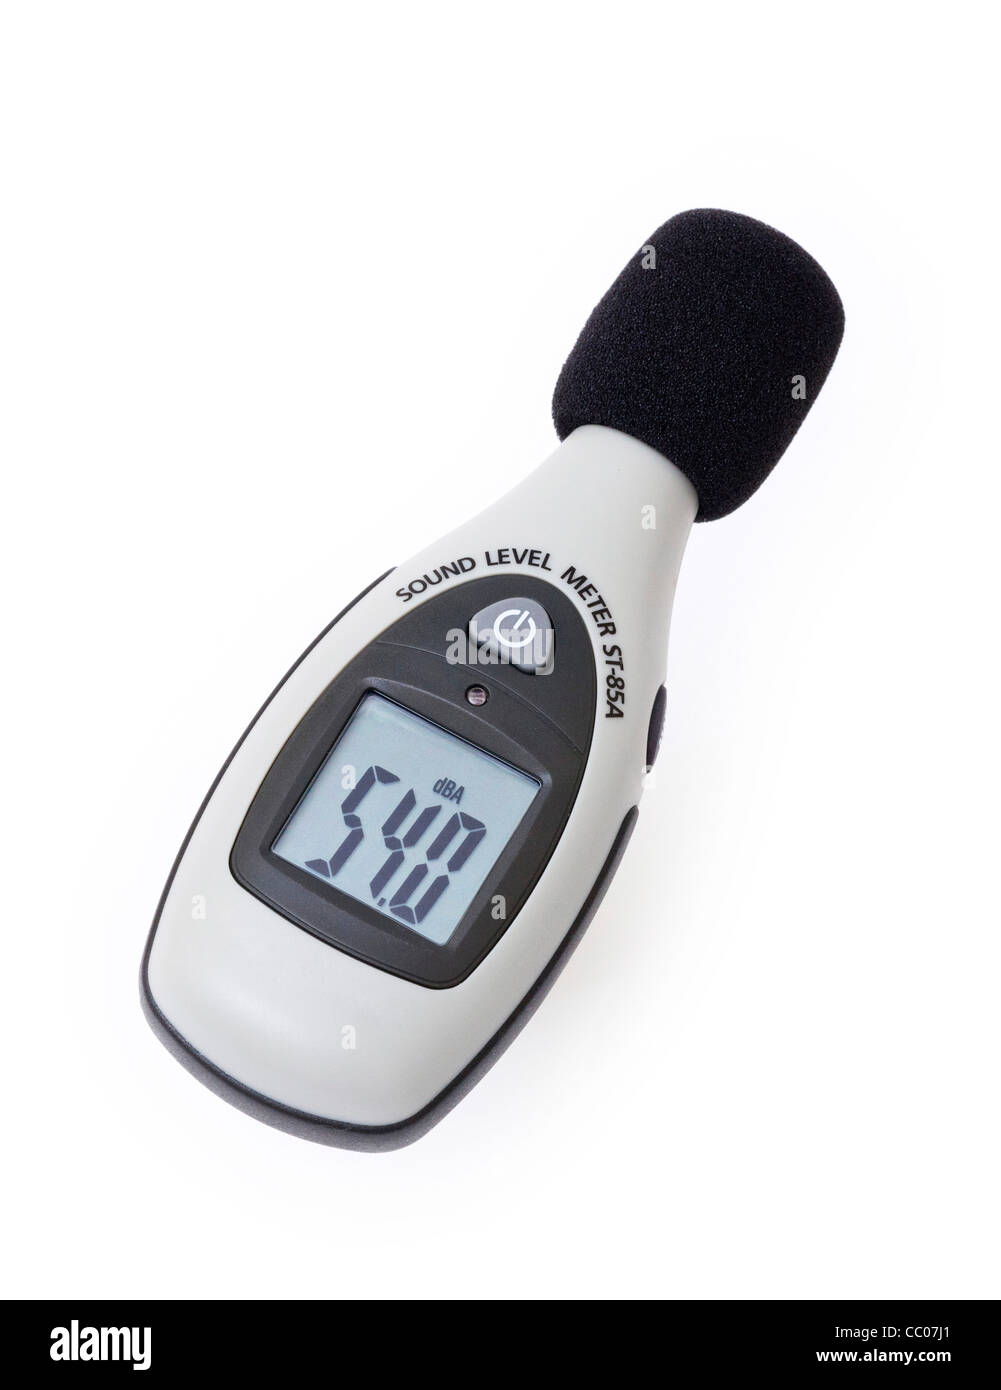 sound level meter showing 54dB Stock Photo